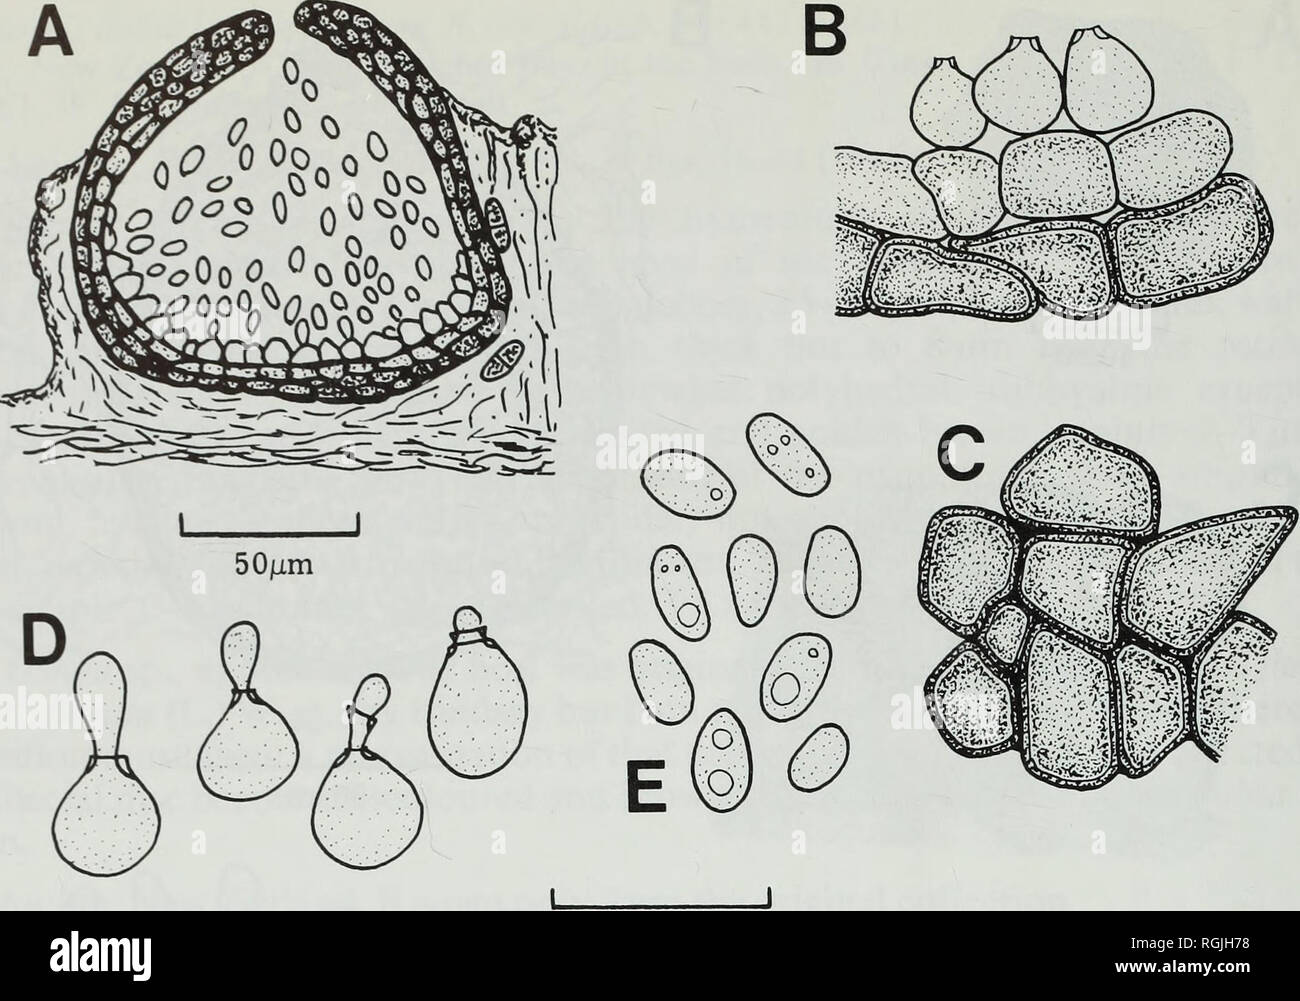 . Bulletin of the British Museum (Natural History). Botany; Botany. 56 D. L. HAWKSWORTH. 10/im Fig. 28 Phoma physciicola (W 1910/609—holotype). A, Vertical section of pycnidium. B, Conidiogenous cells and pycnidial wall. C, Surface view of pycnidial wall. D, Conidi- genous cells. E, Conidia. 5. Phoma physciicola Keissler, Hedwigia 50 : 294 (1911). (Fig. 28A-E) Type: Austria, Steiermark, Gams bei Hieflau, on Phvscia aipolia, June 1910, K. von Keissler (W 1910/609—holotype!). Icones: Keissler, Hedwigia 50:295 fig. la-c (1911).—Keissler, Rabenh. Krvpt.-Fl. 8:539 figs. 102-103(1930). Conidiomata p Stock Photo